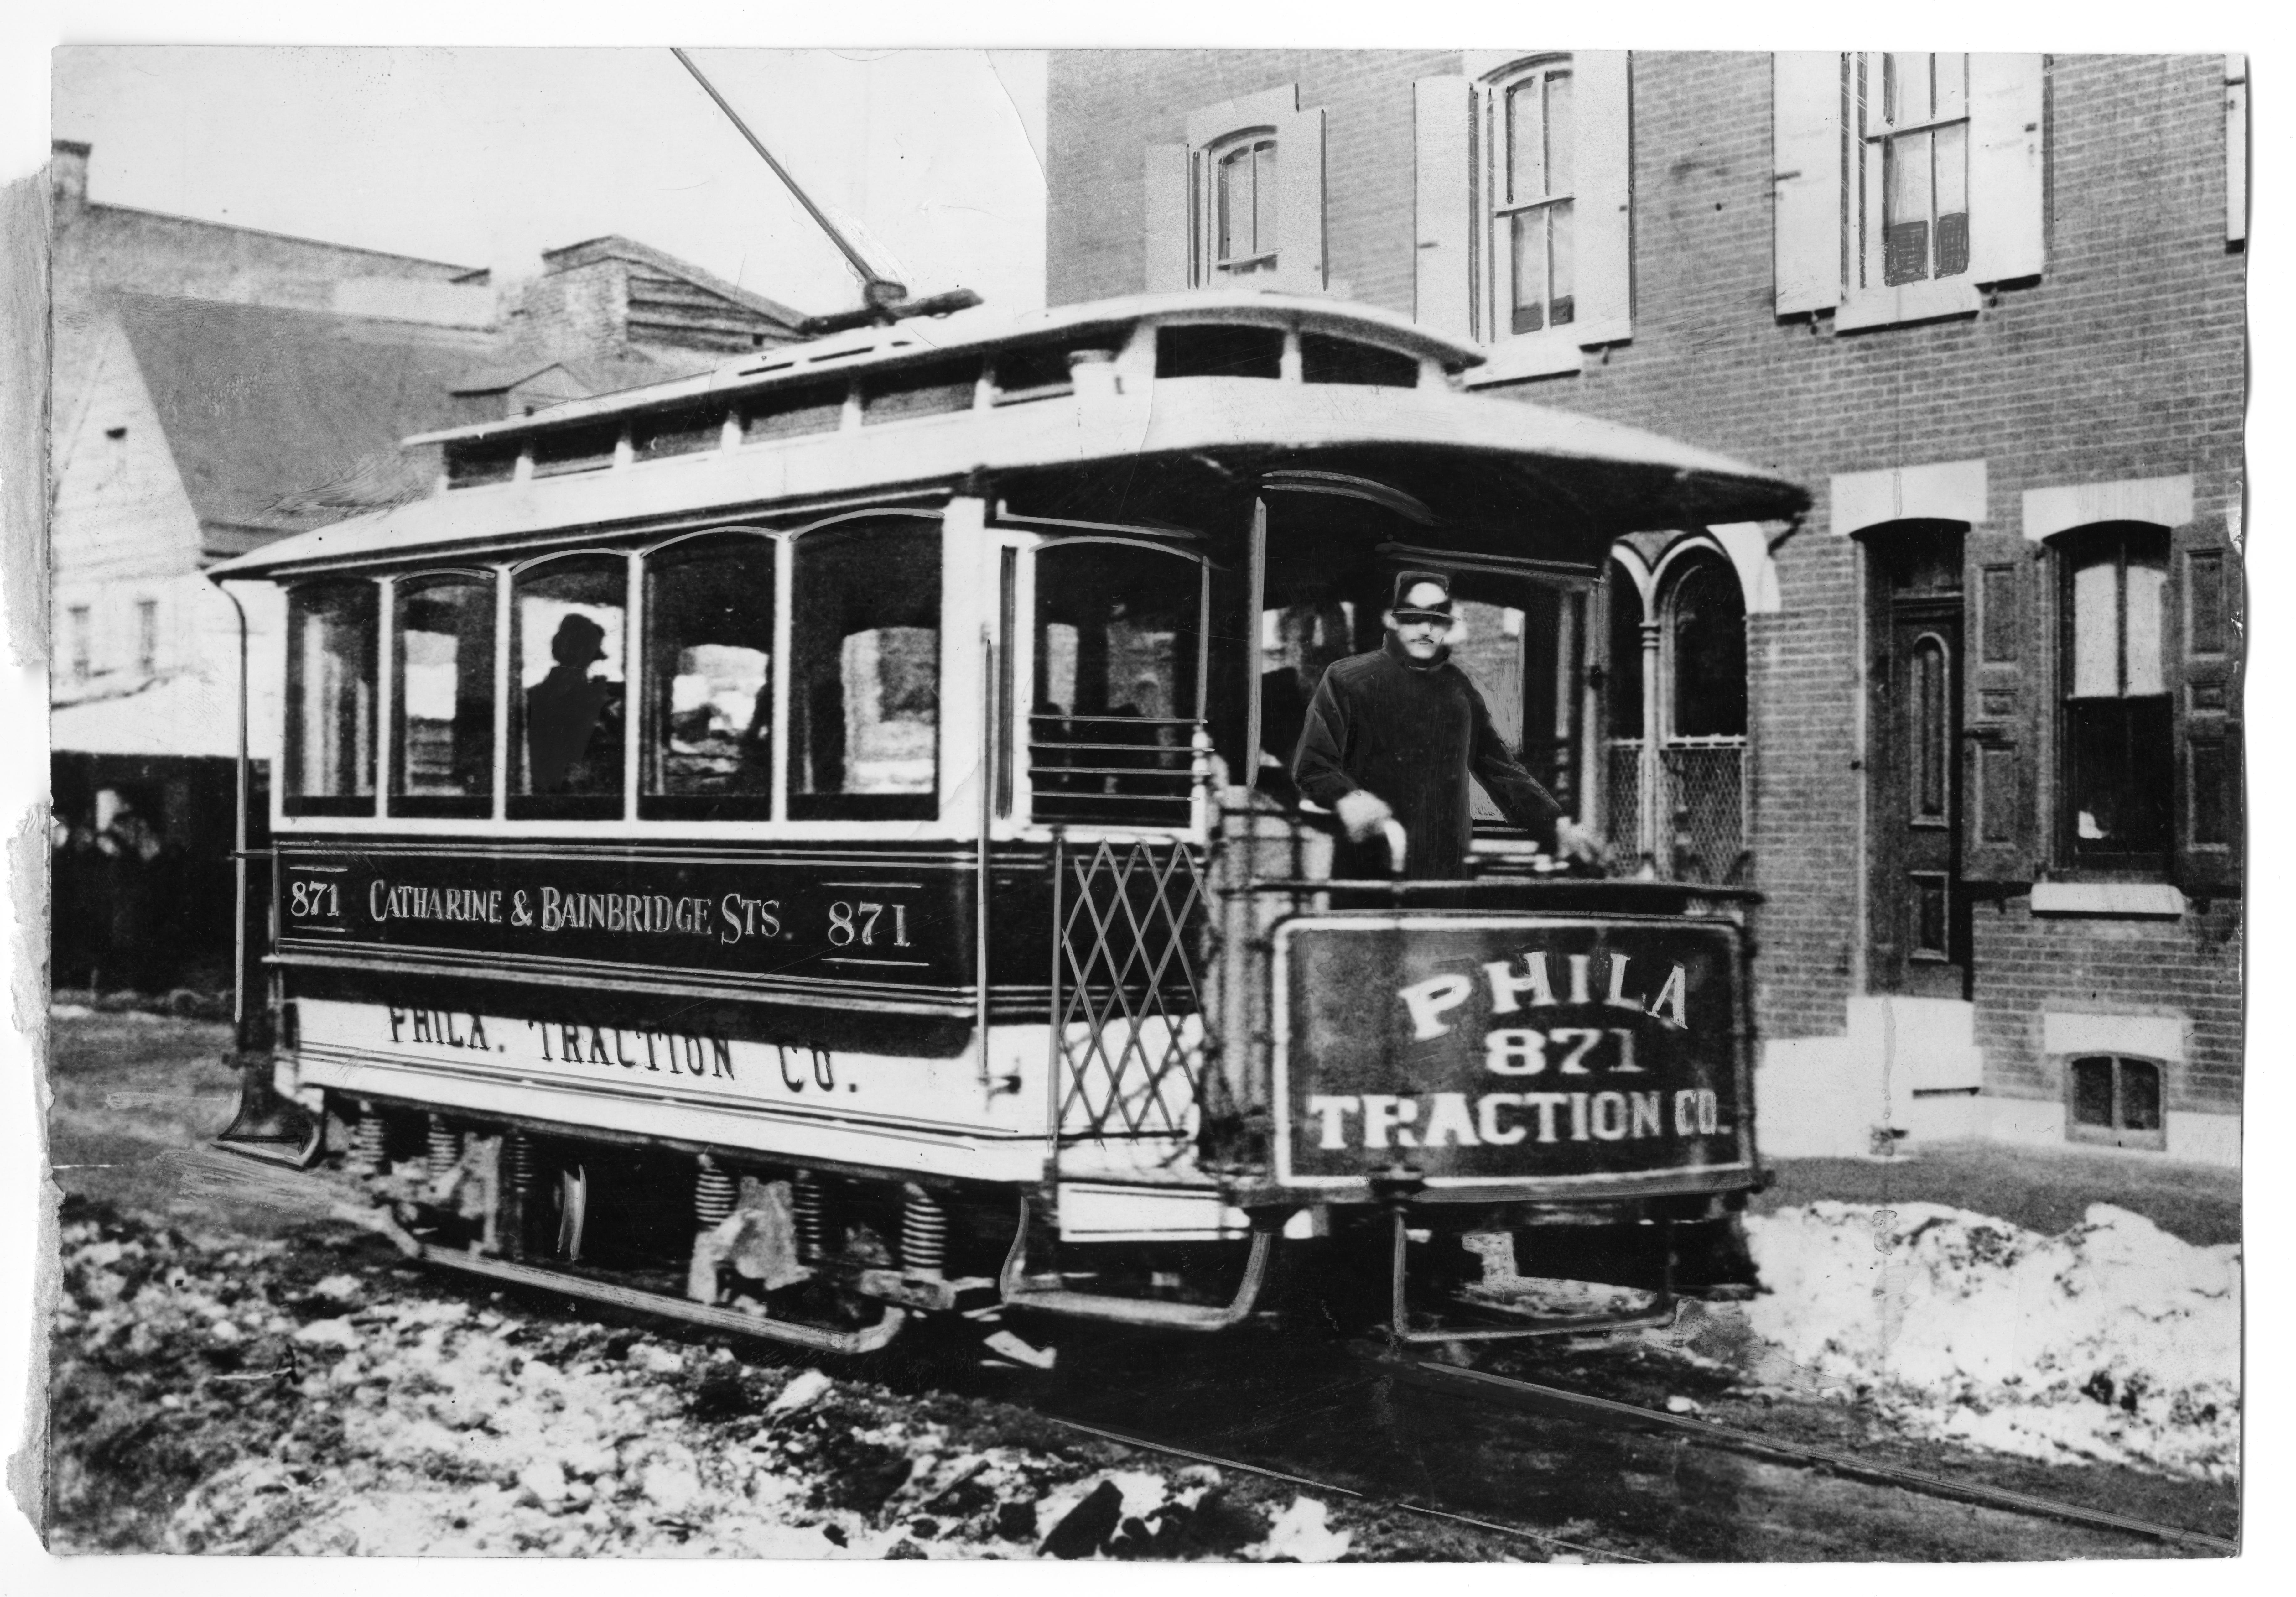 Record Number: 627Collection: Philadelphia Record Photograph Morgue[V07]Folder Number: FF 3736Reproduction restrictions: UnknownAddress: Philadelphia, PA 19147, USADate of Original: 1892Photograph depicts an electric trolley from the Philadelphia Traction Company. The trolley, no. 871 (Catherine and Bainbridge Streets), is one of the first electric trolleys in the city.